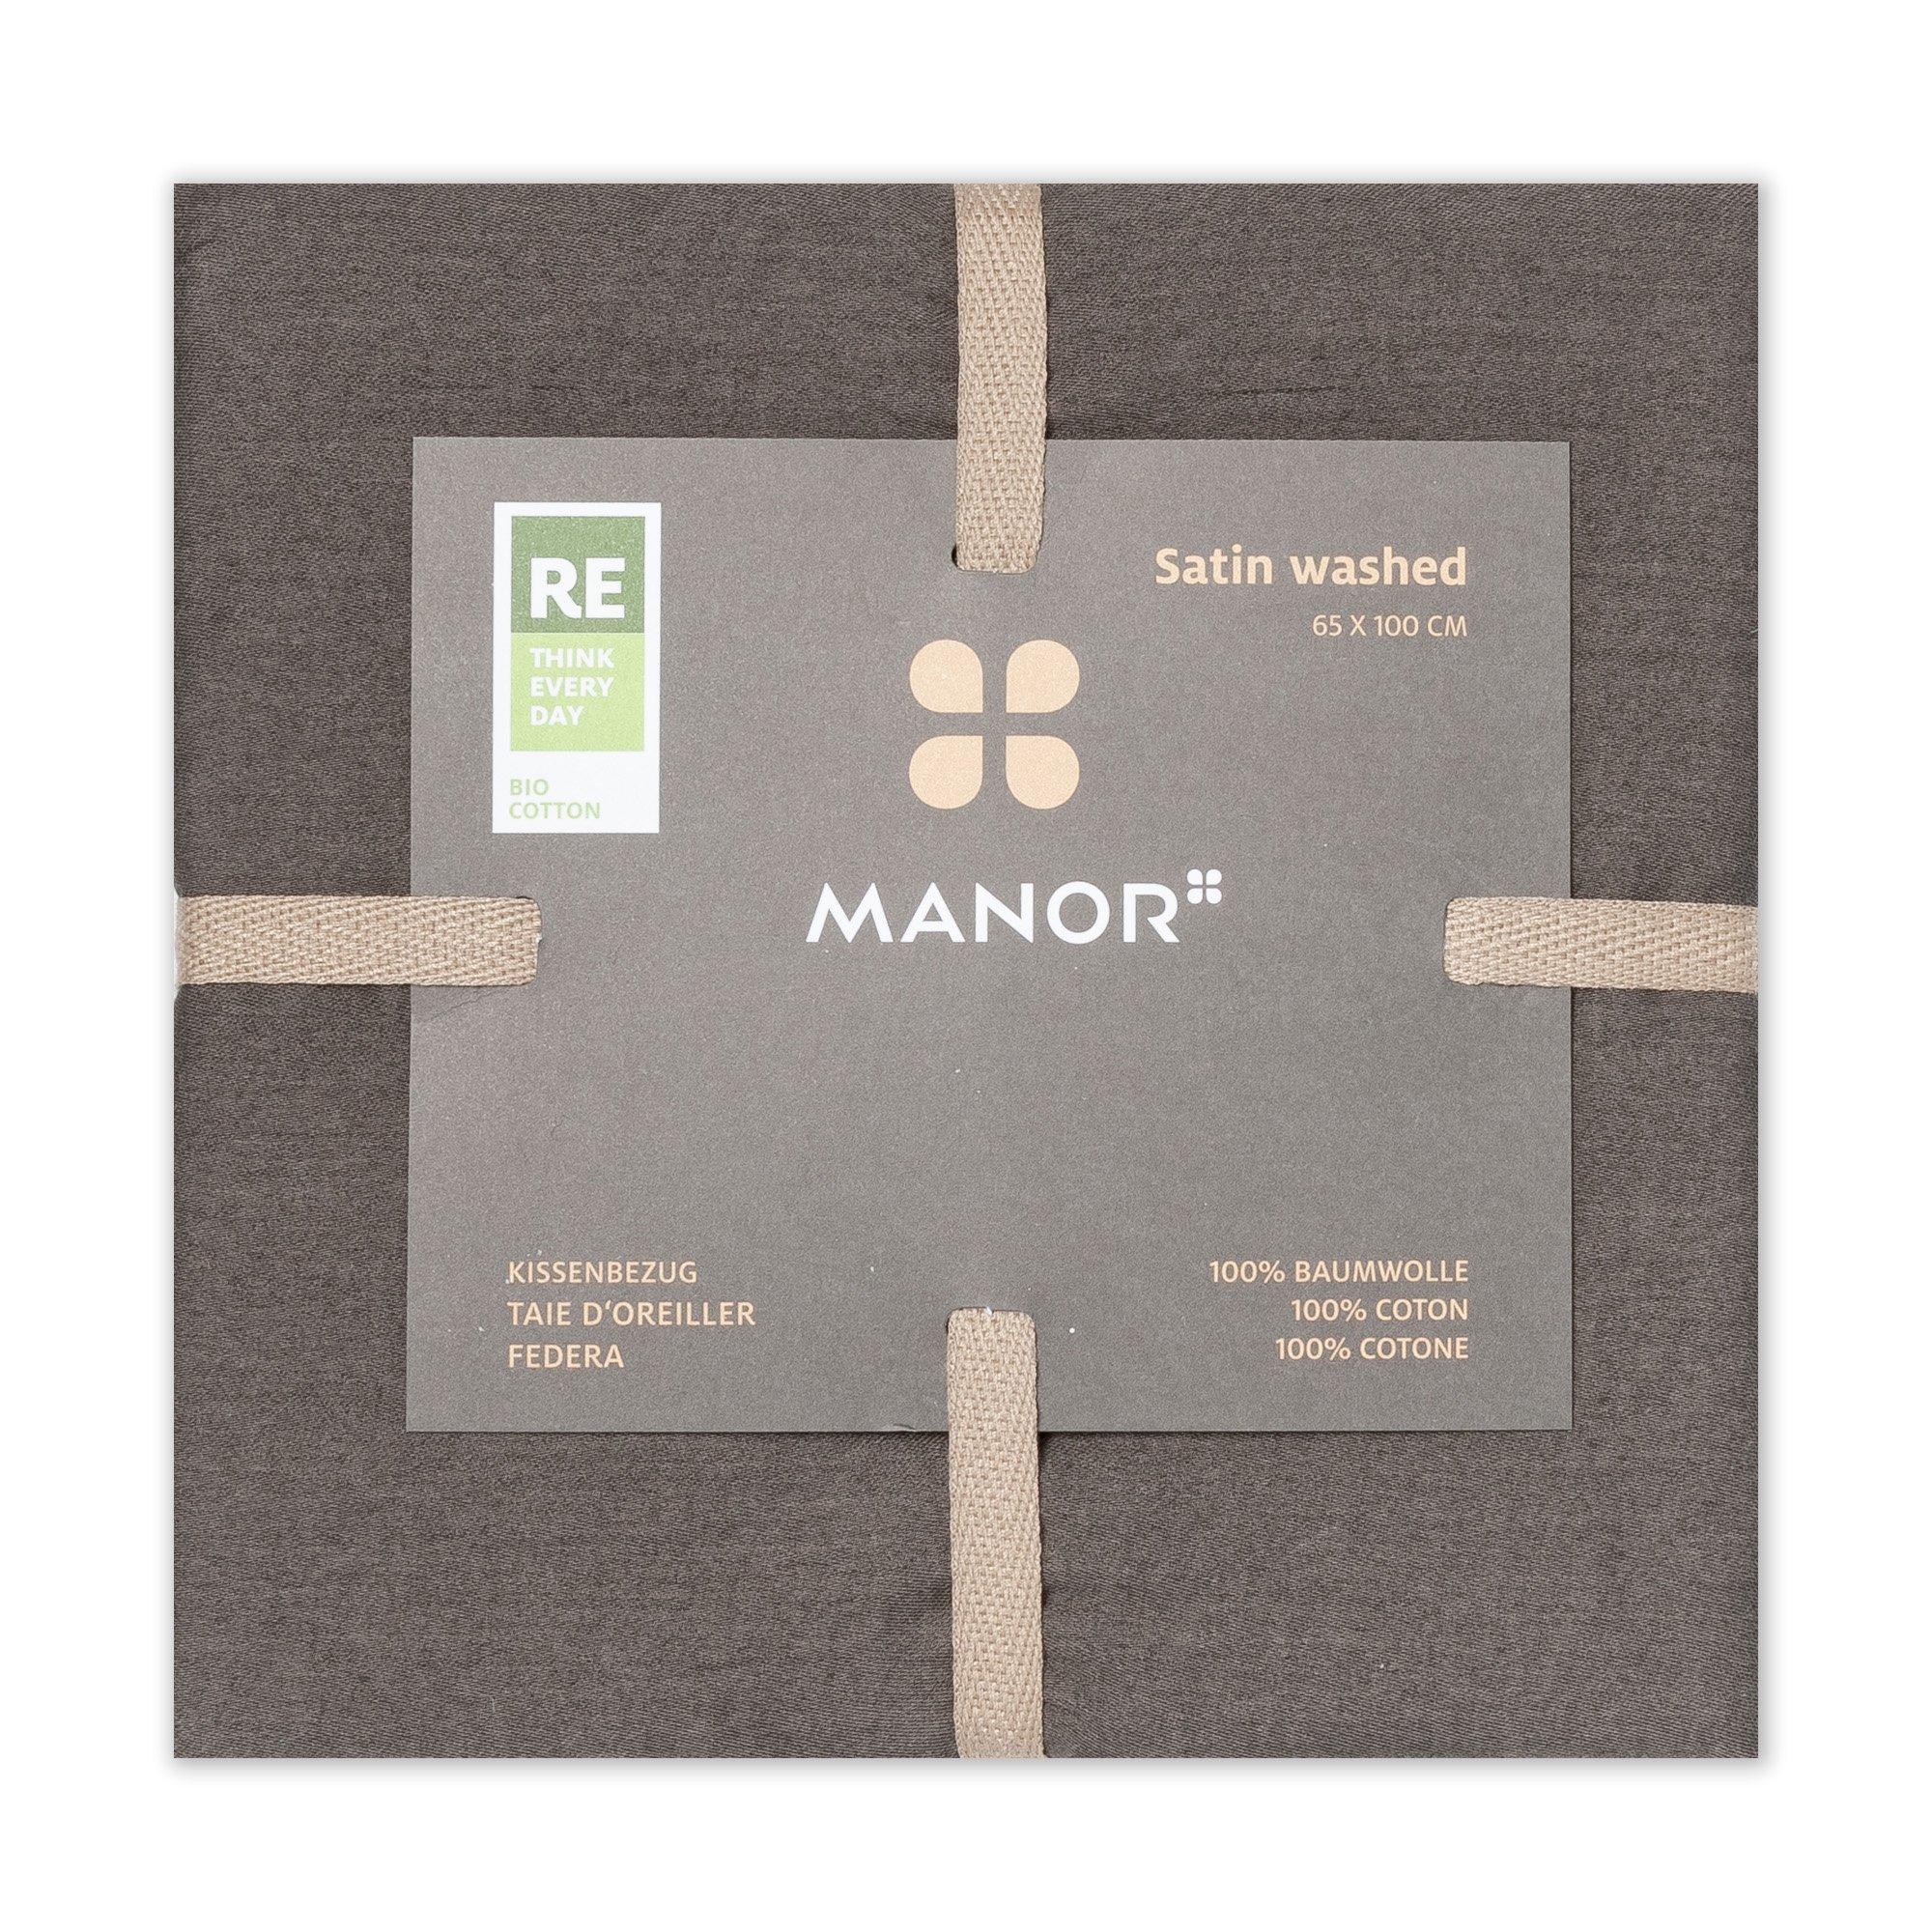 Manor Taie d'oreiller Satin washed uni 